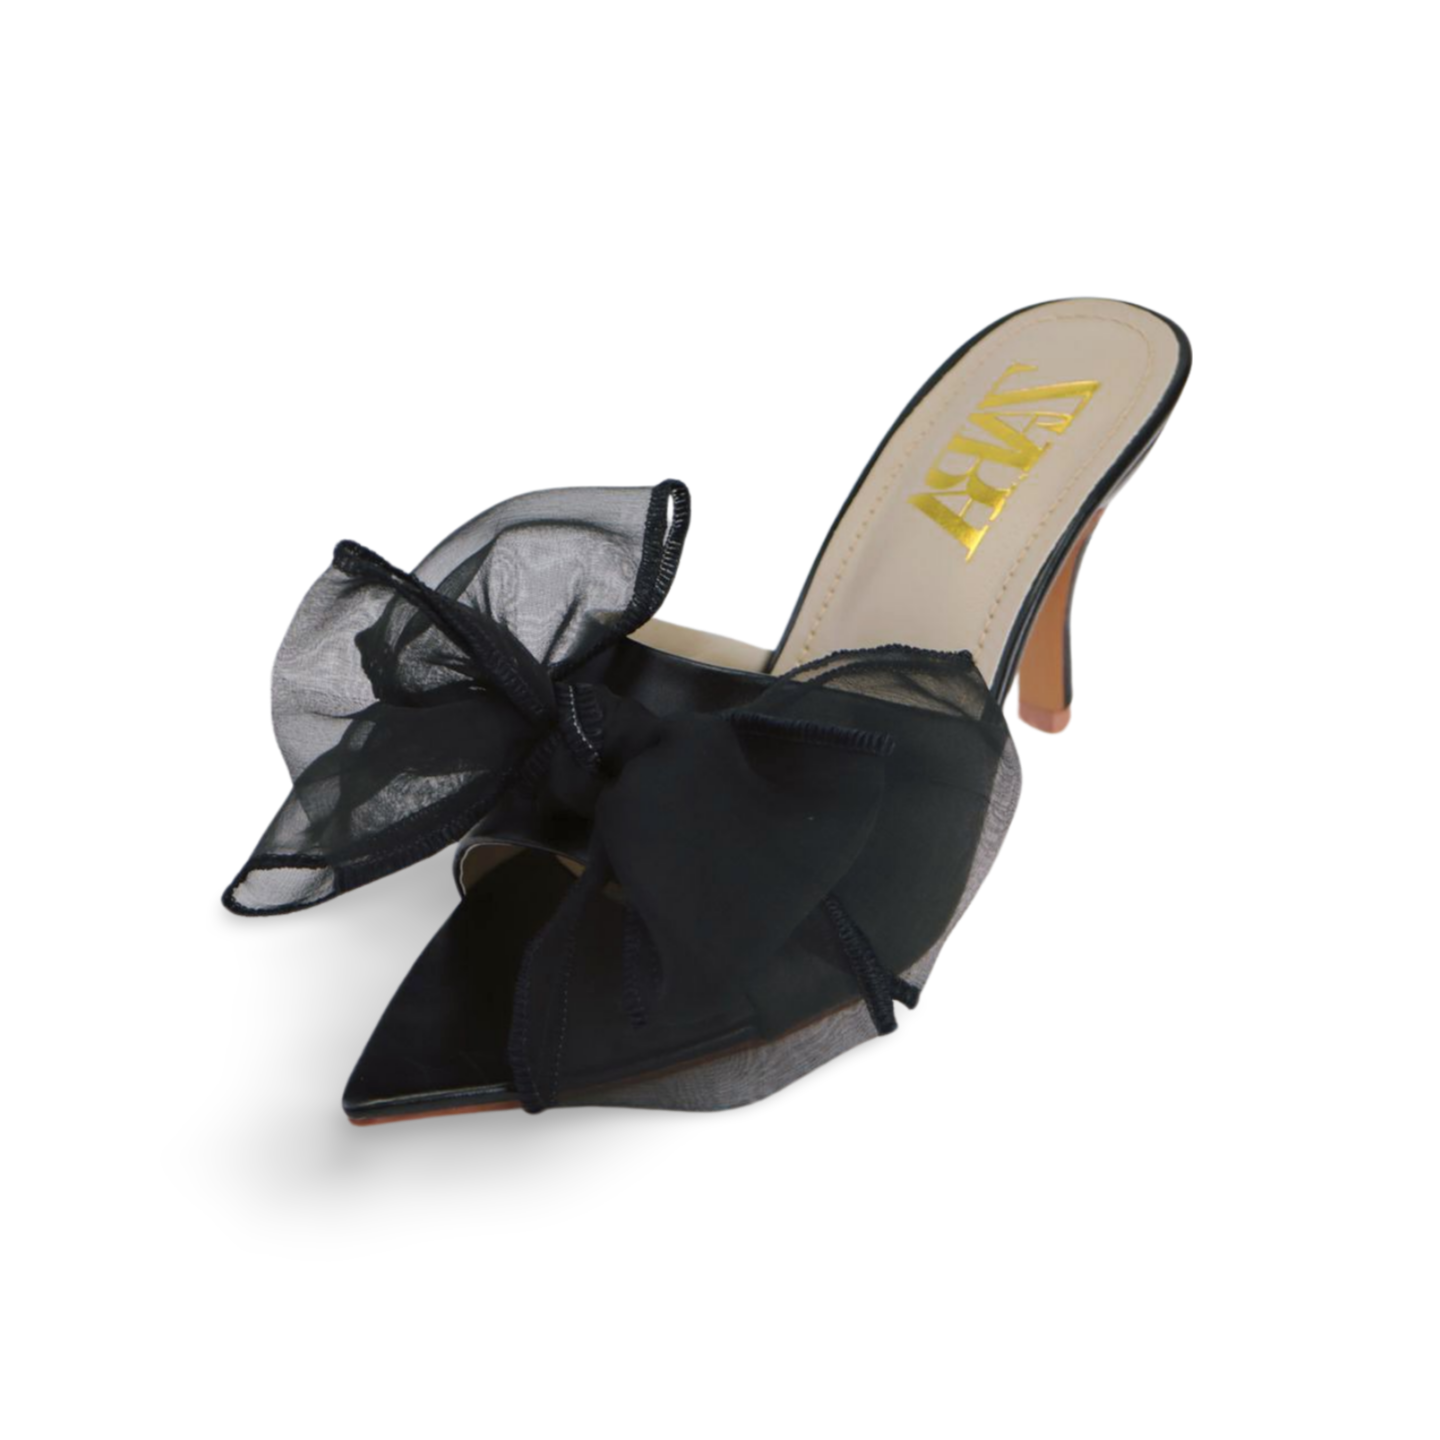 Stylish Mules with Satin Ribbon Bow for Women - Elegant and Comfortable Shoes for Any Occasion